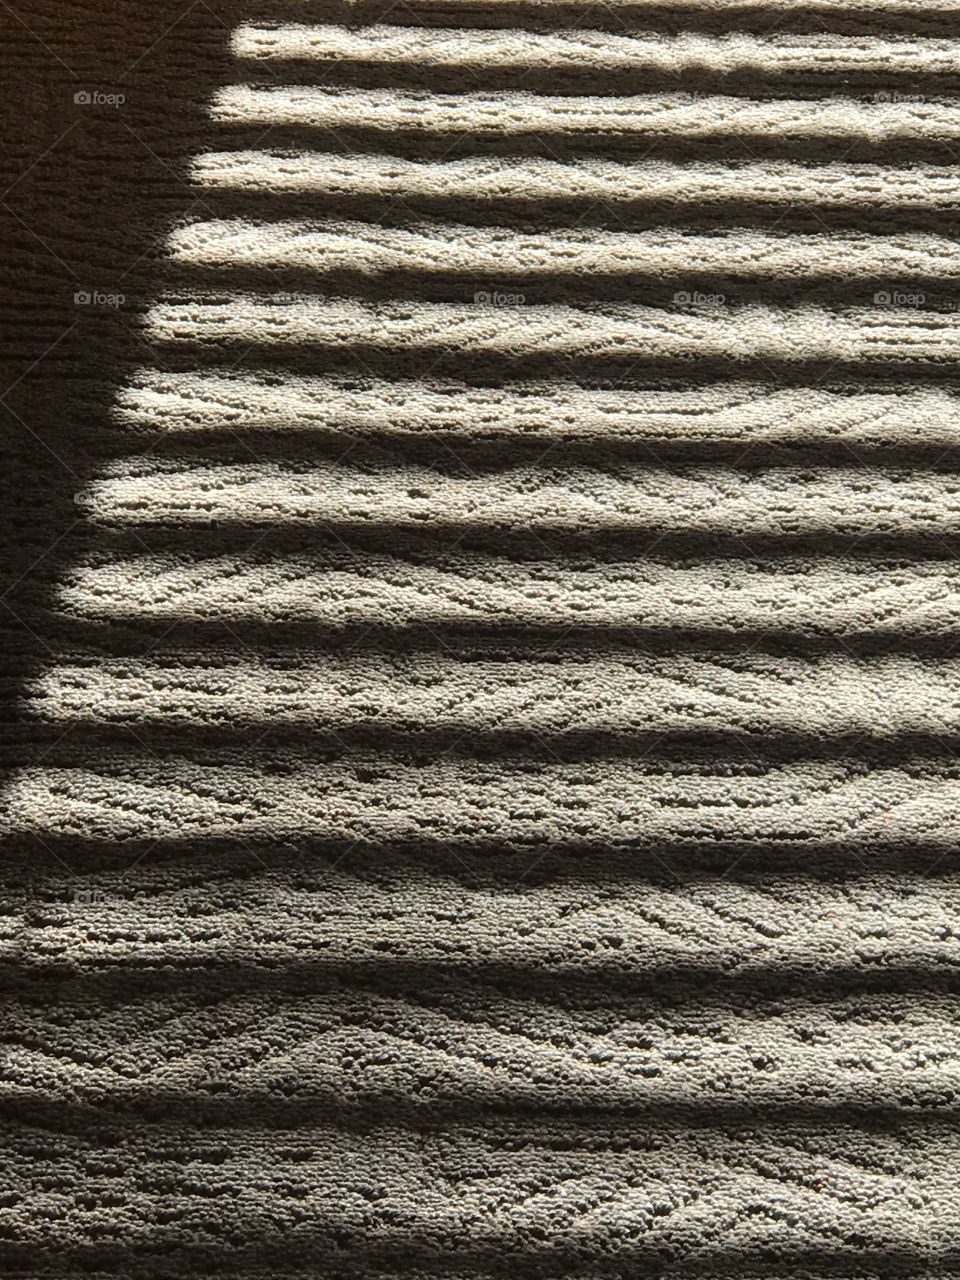 Horizontal stripes from blinds